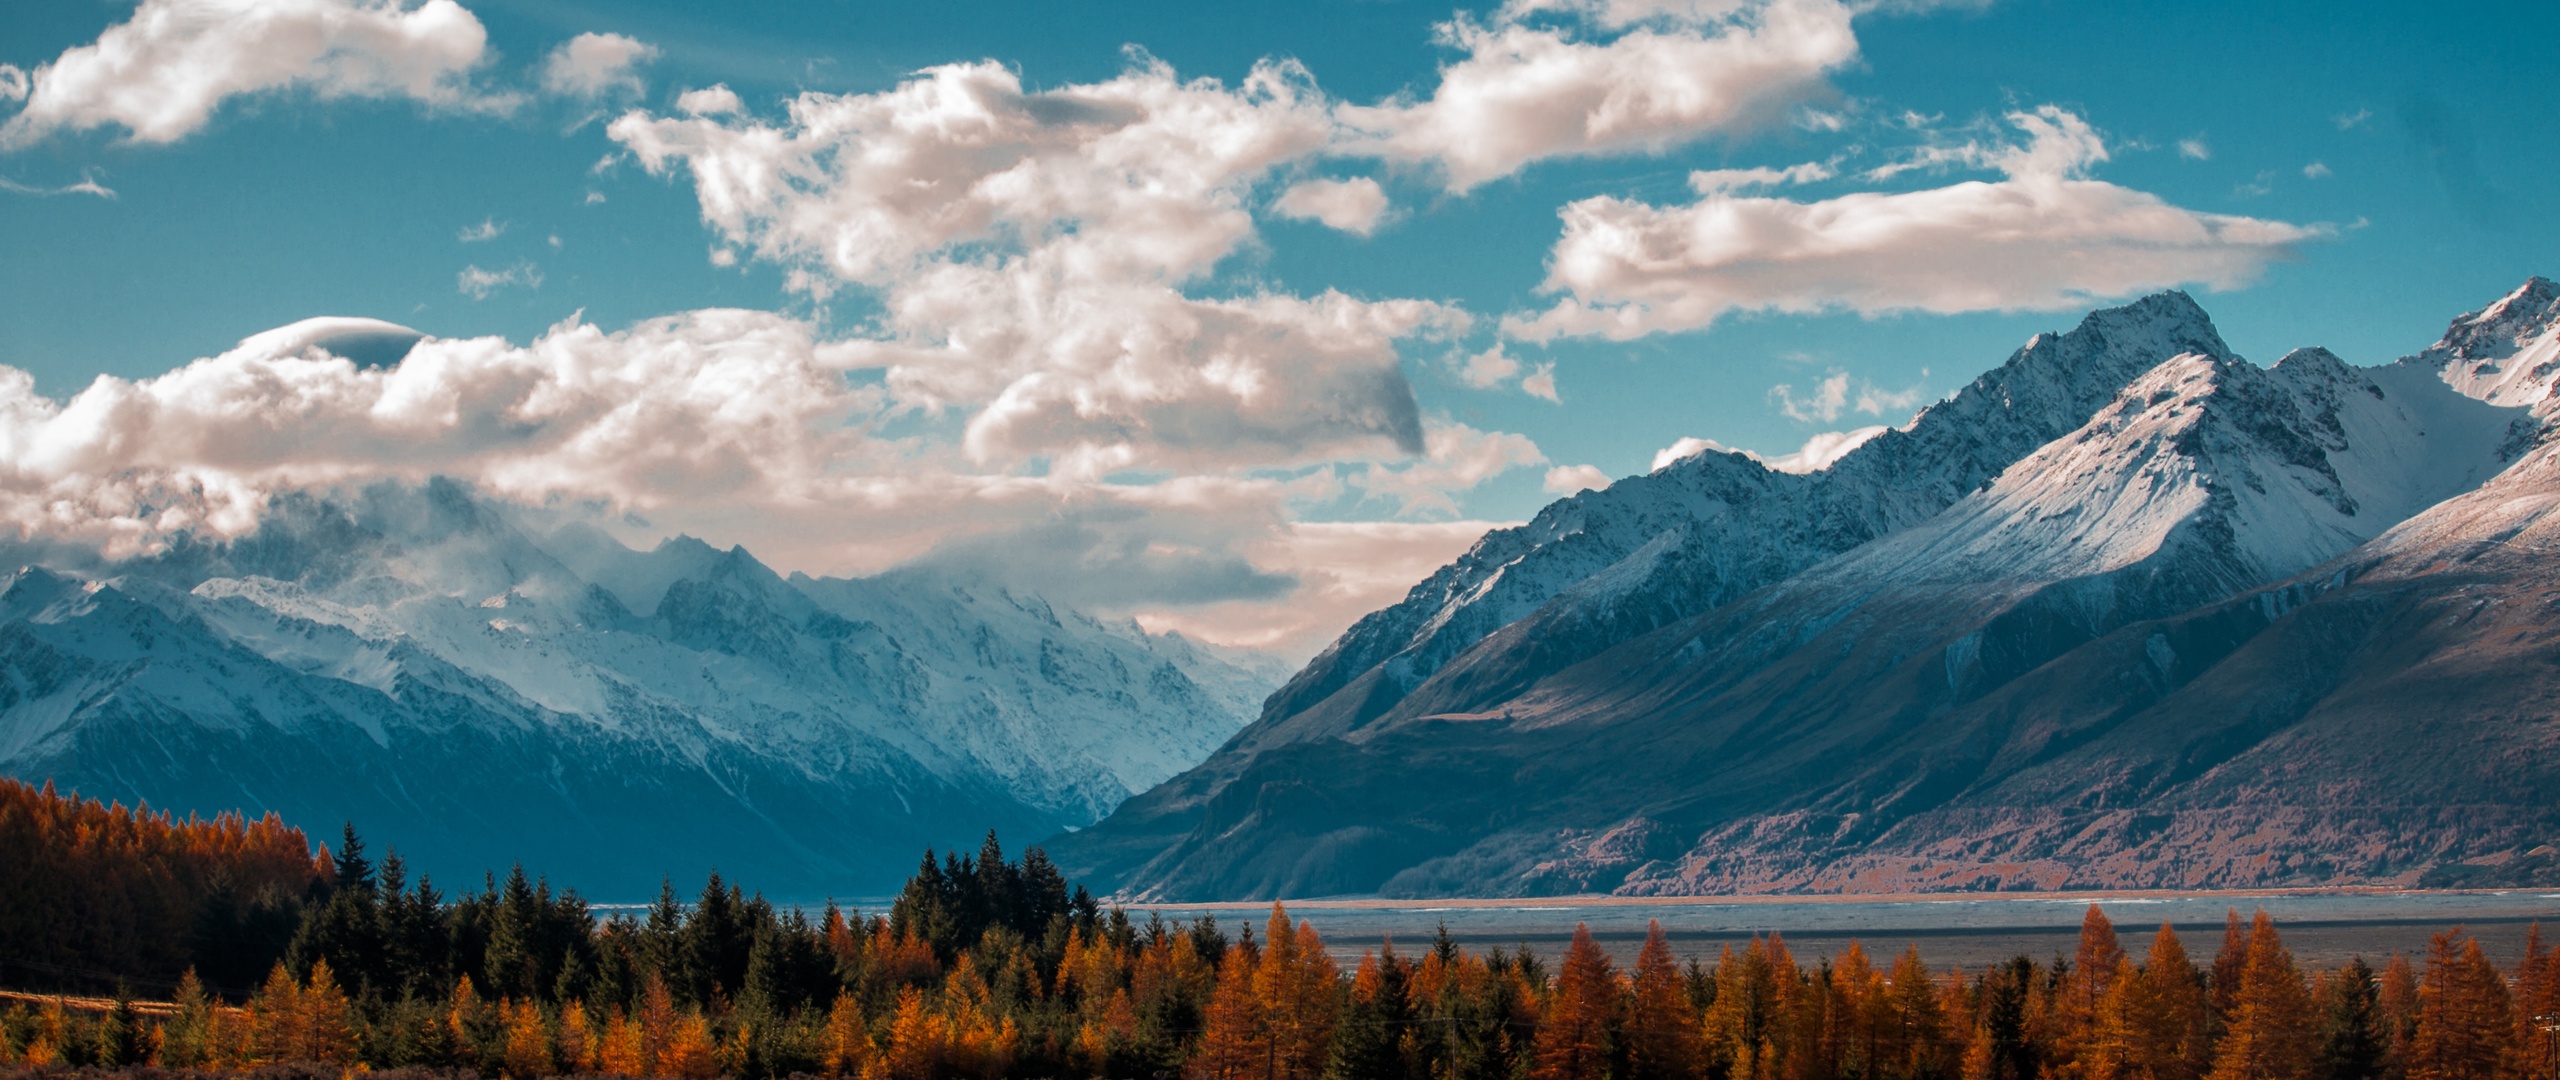 mountains-landscape-nw-2560x1080.jpg